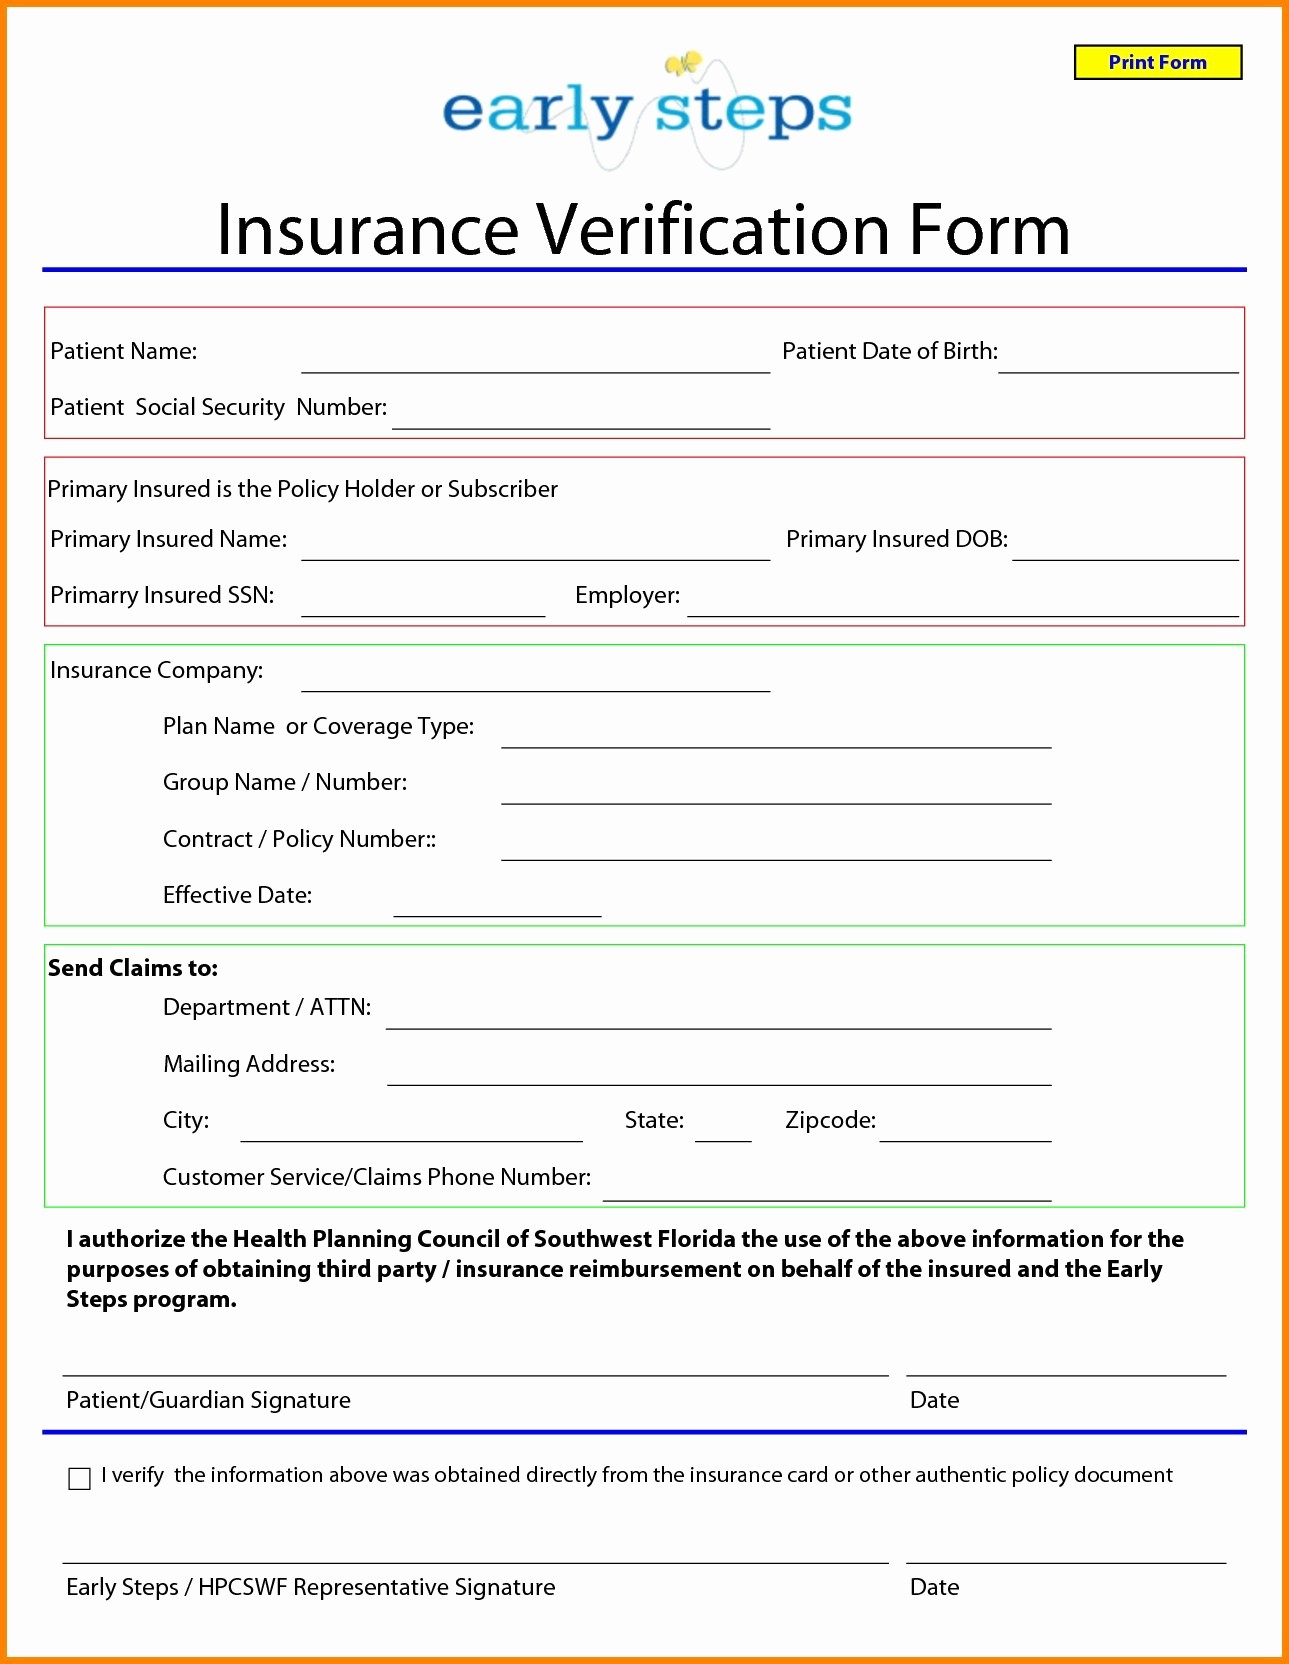 50 Awesome Free Fake Insurance Card Maker DOCUMENTS IDEAS Document Car